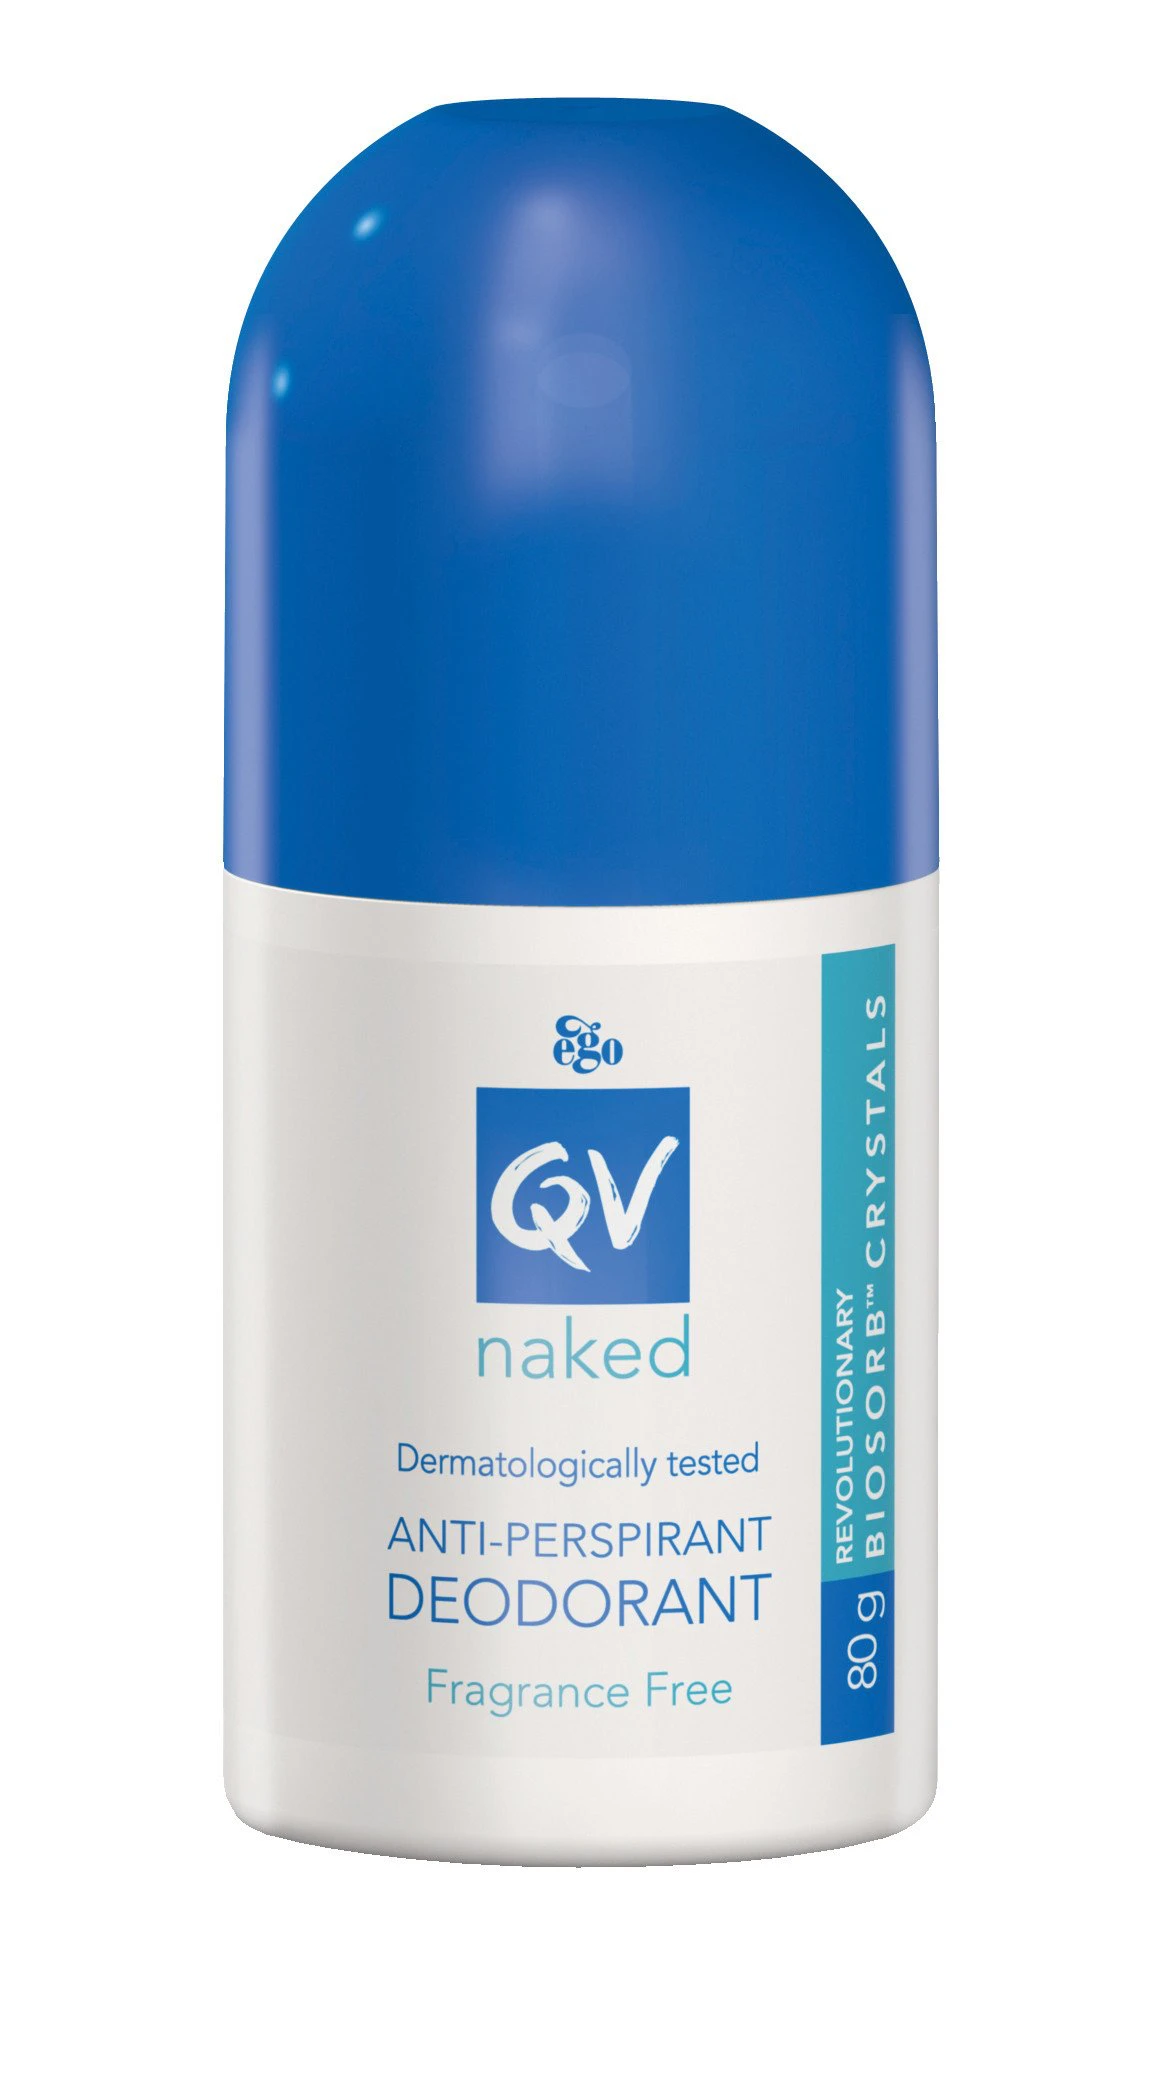 naked dermotologically tested deodorant